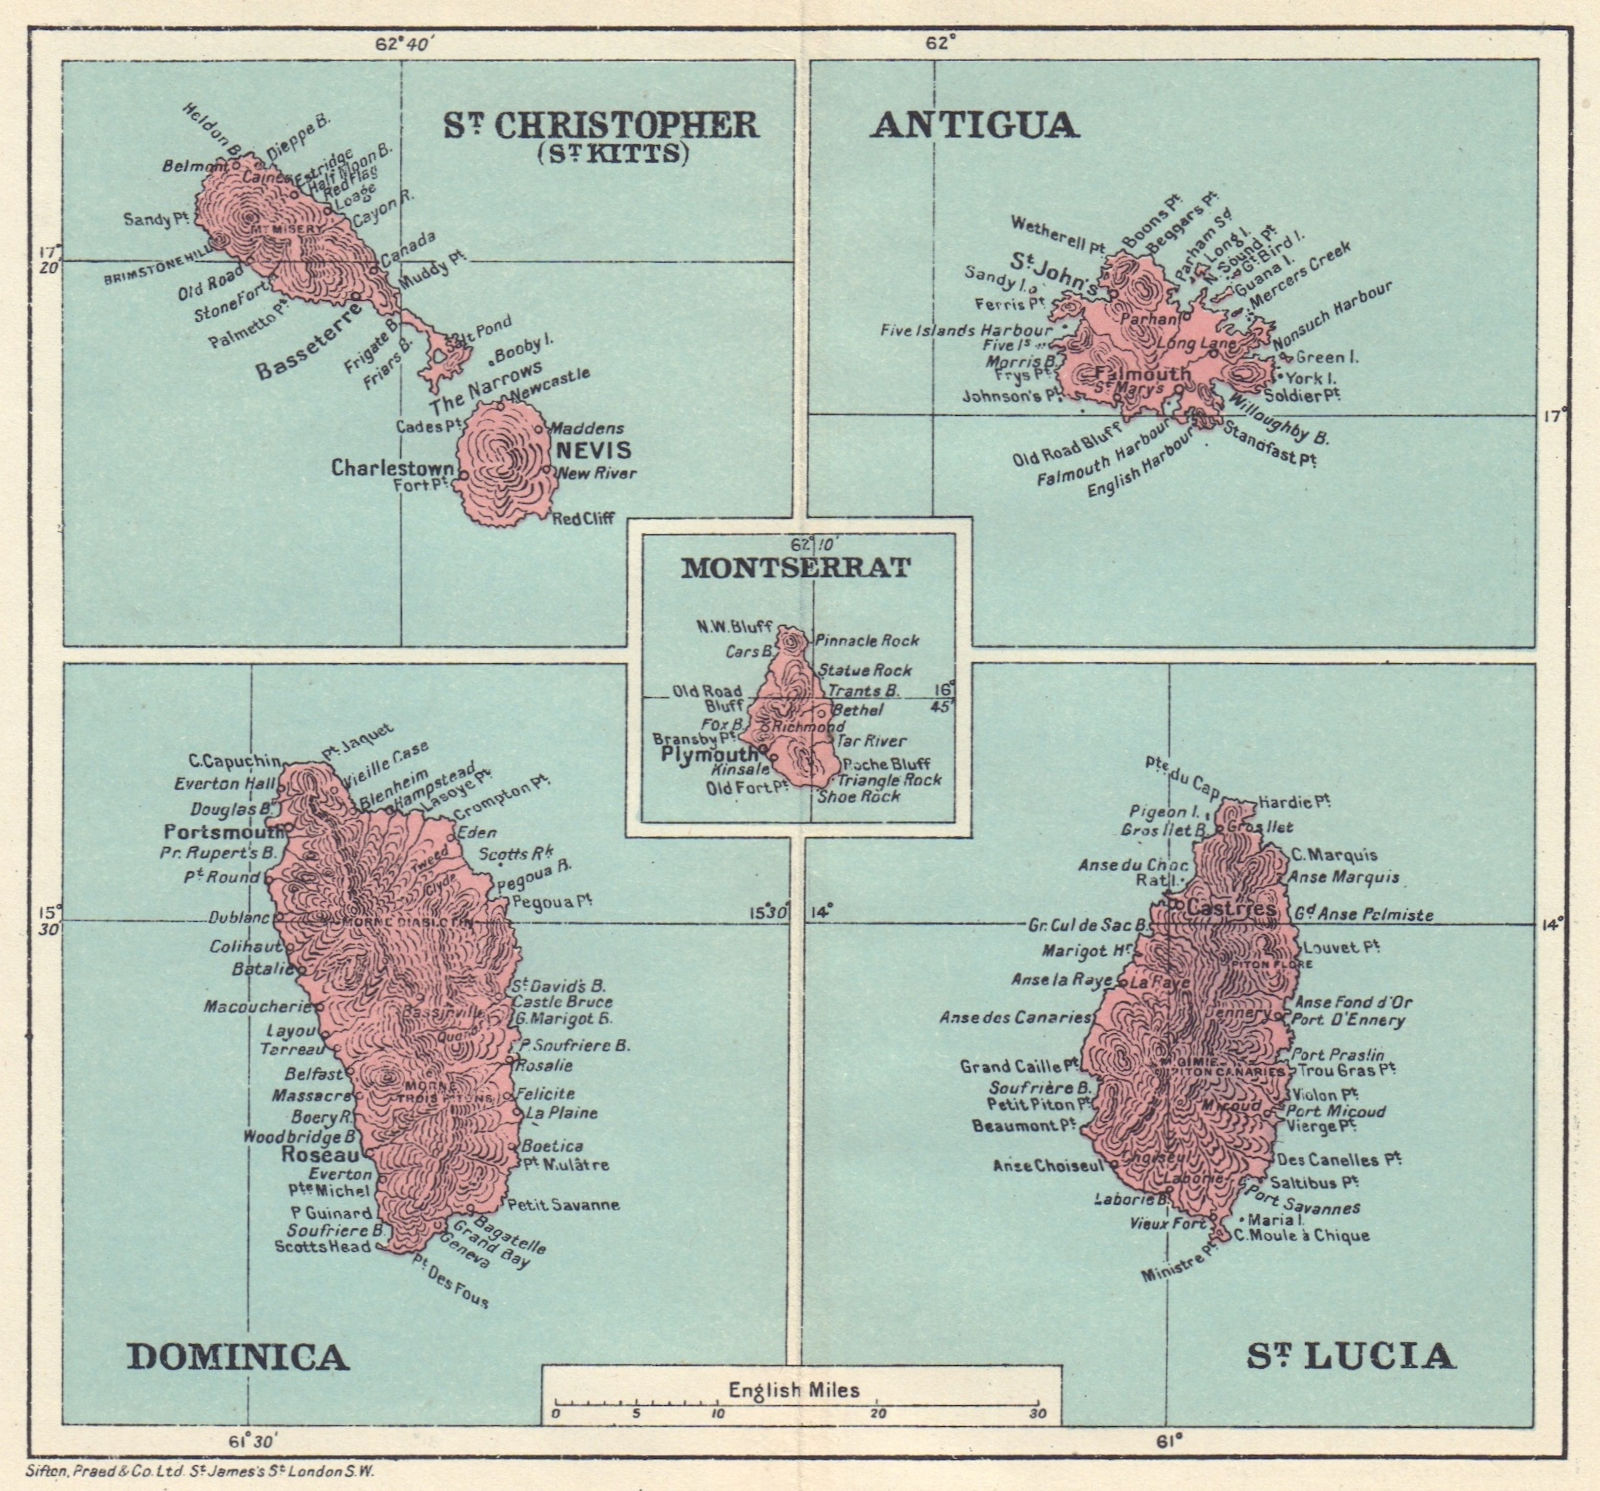 WEST INDIES. Dominica St Kitts Antigua St Lucia Montserrat 1923 old map